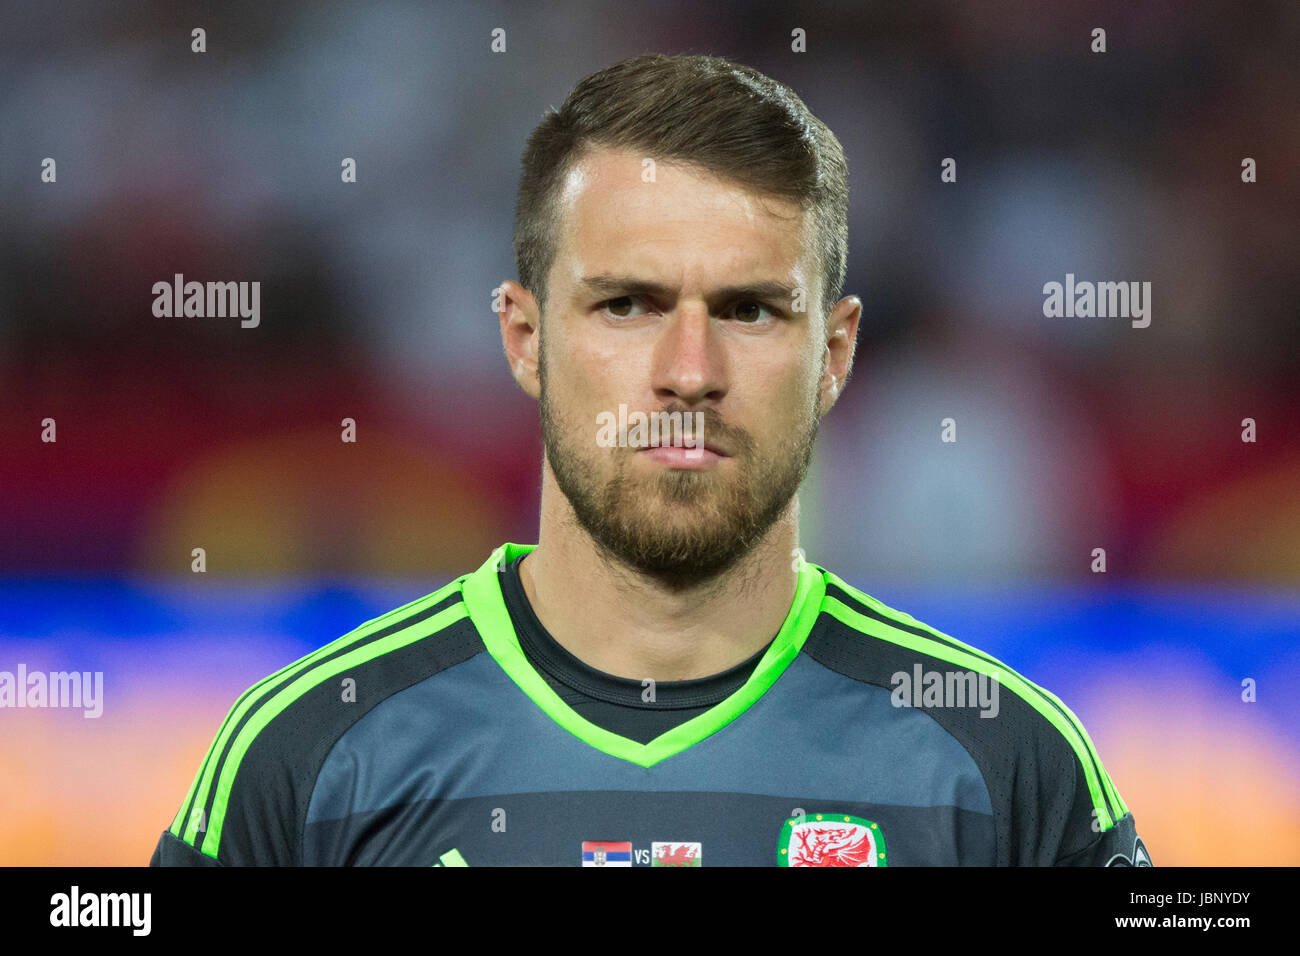 BELGRADE, SERBIA - JUNE 11, 2017: Aaron Ramsey of Wales looks on during the national anthem during the 2018 FIFA World Cup Qualifier match between Ser Stock Photo